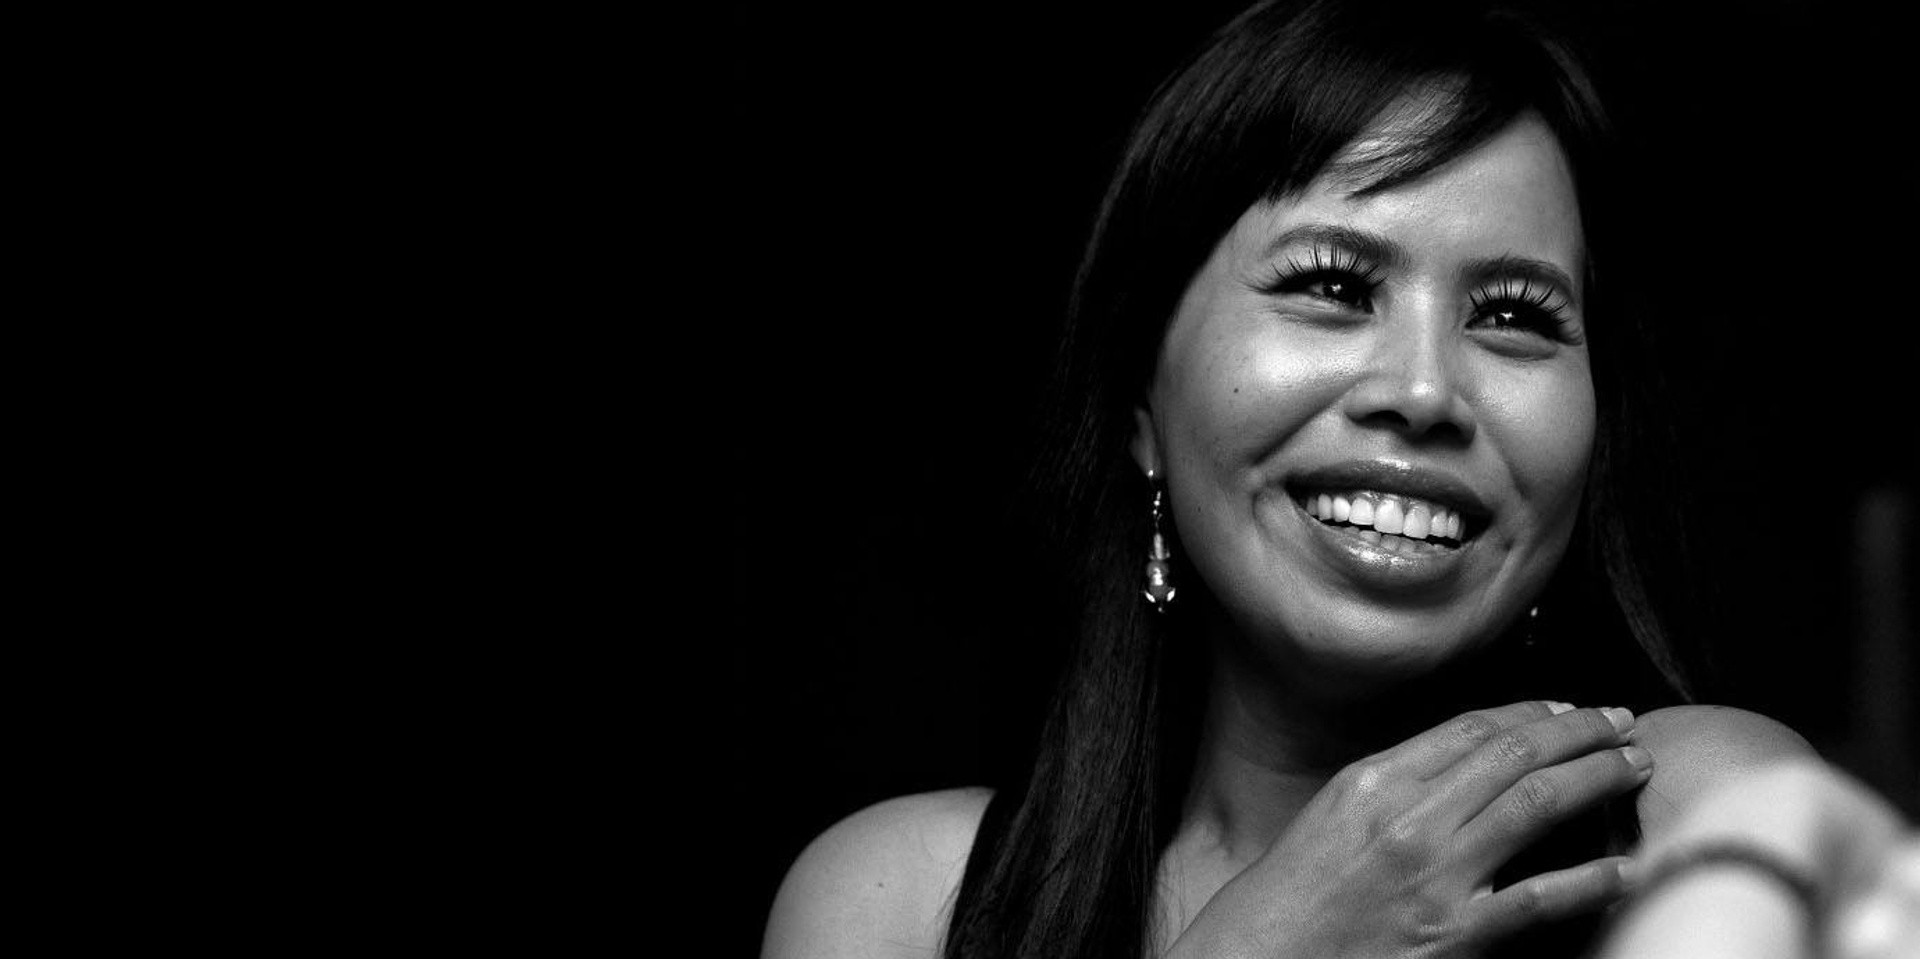 R.I.P Kak Channthy, frontwoman of The Cambodian Space Project